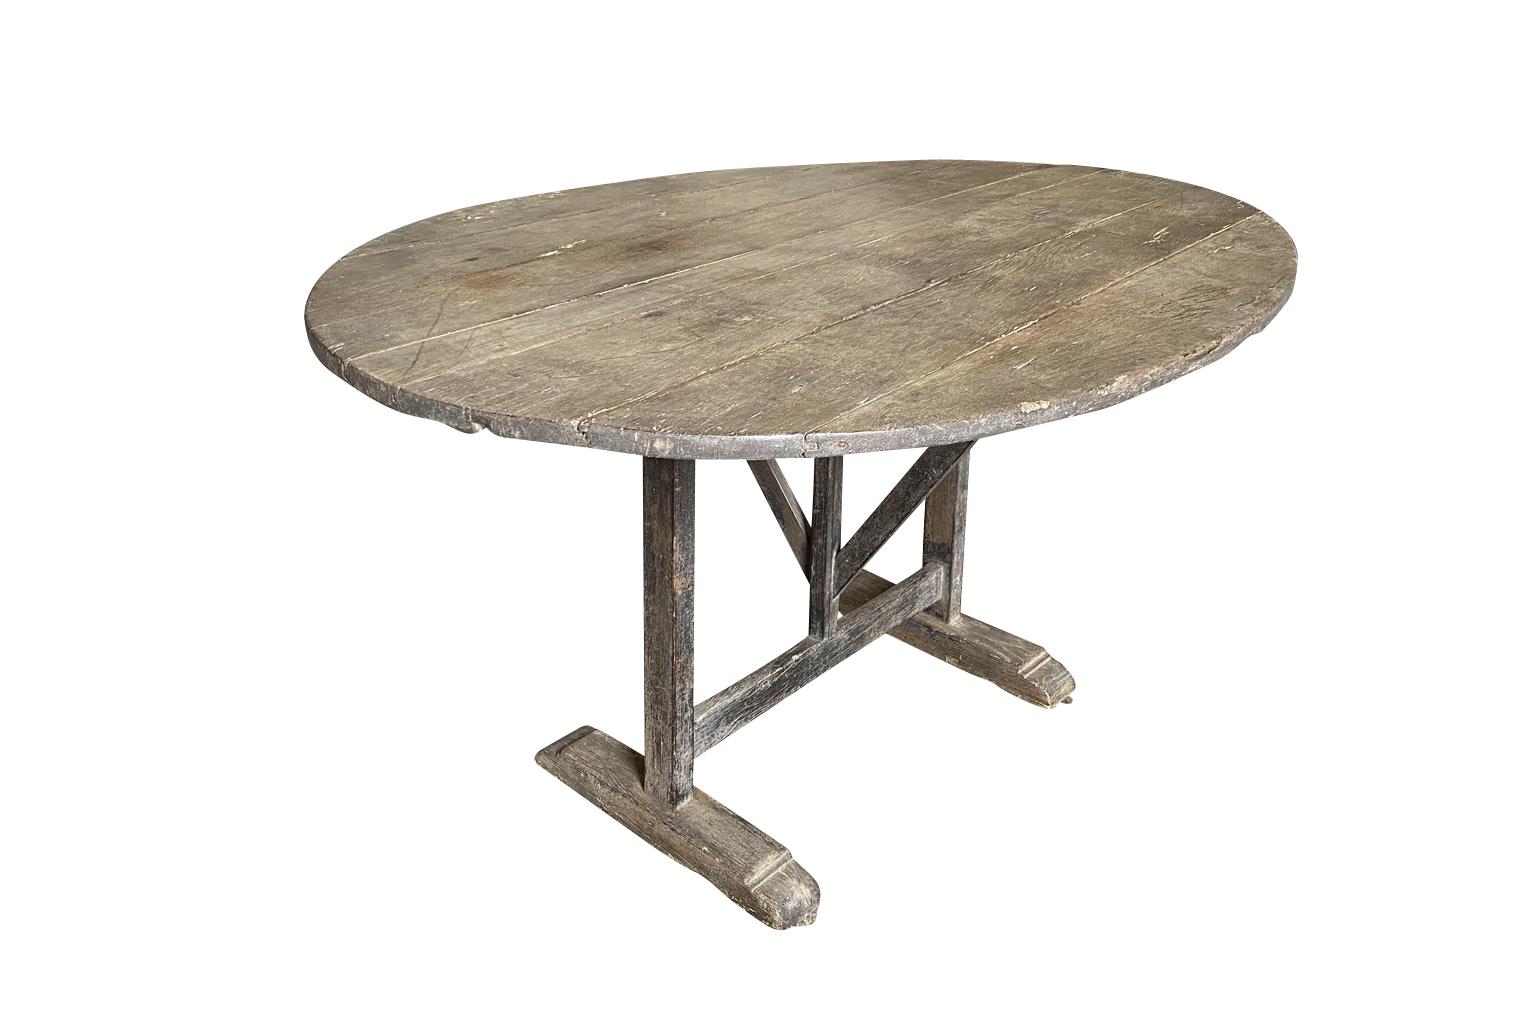 A very beautiful later 19th century oval shaped table Vigneron - Wine tasting table from the Provence region of France. Soundly constructed from naturally washed oak with the top that tilts. Terrific for interior or exterior use.